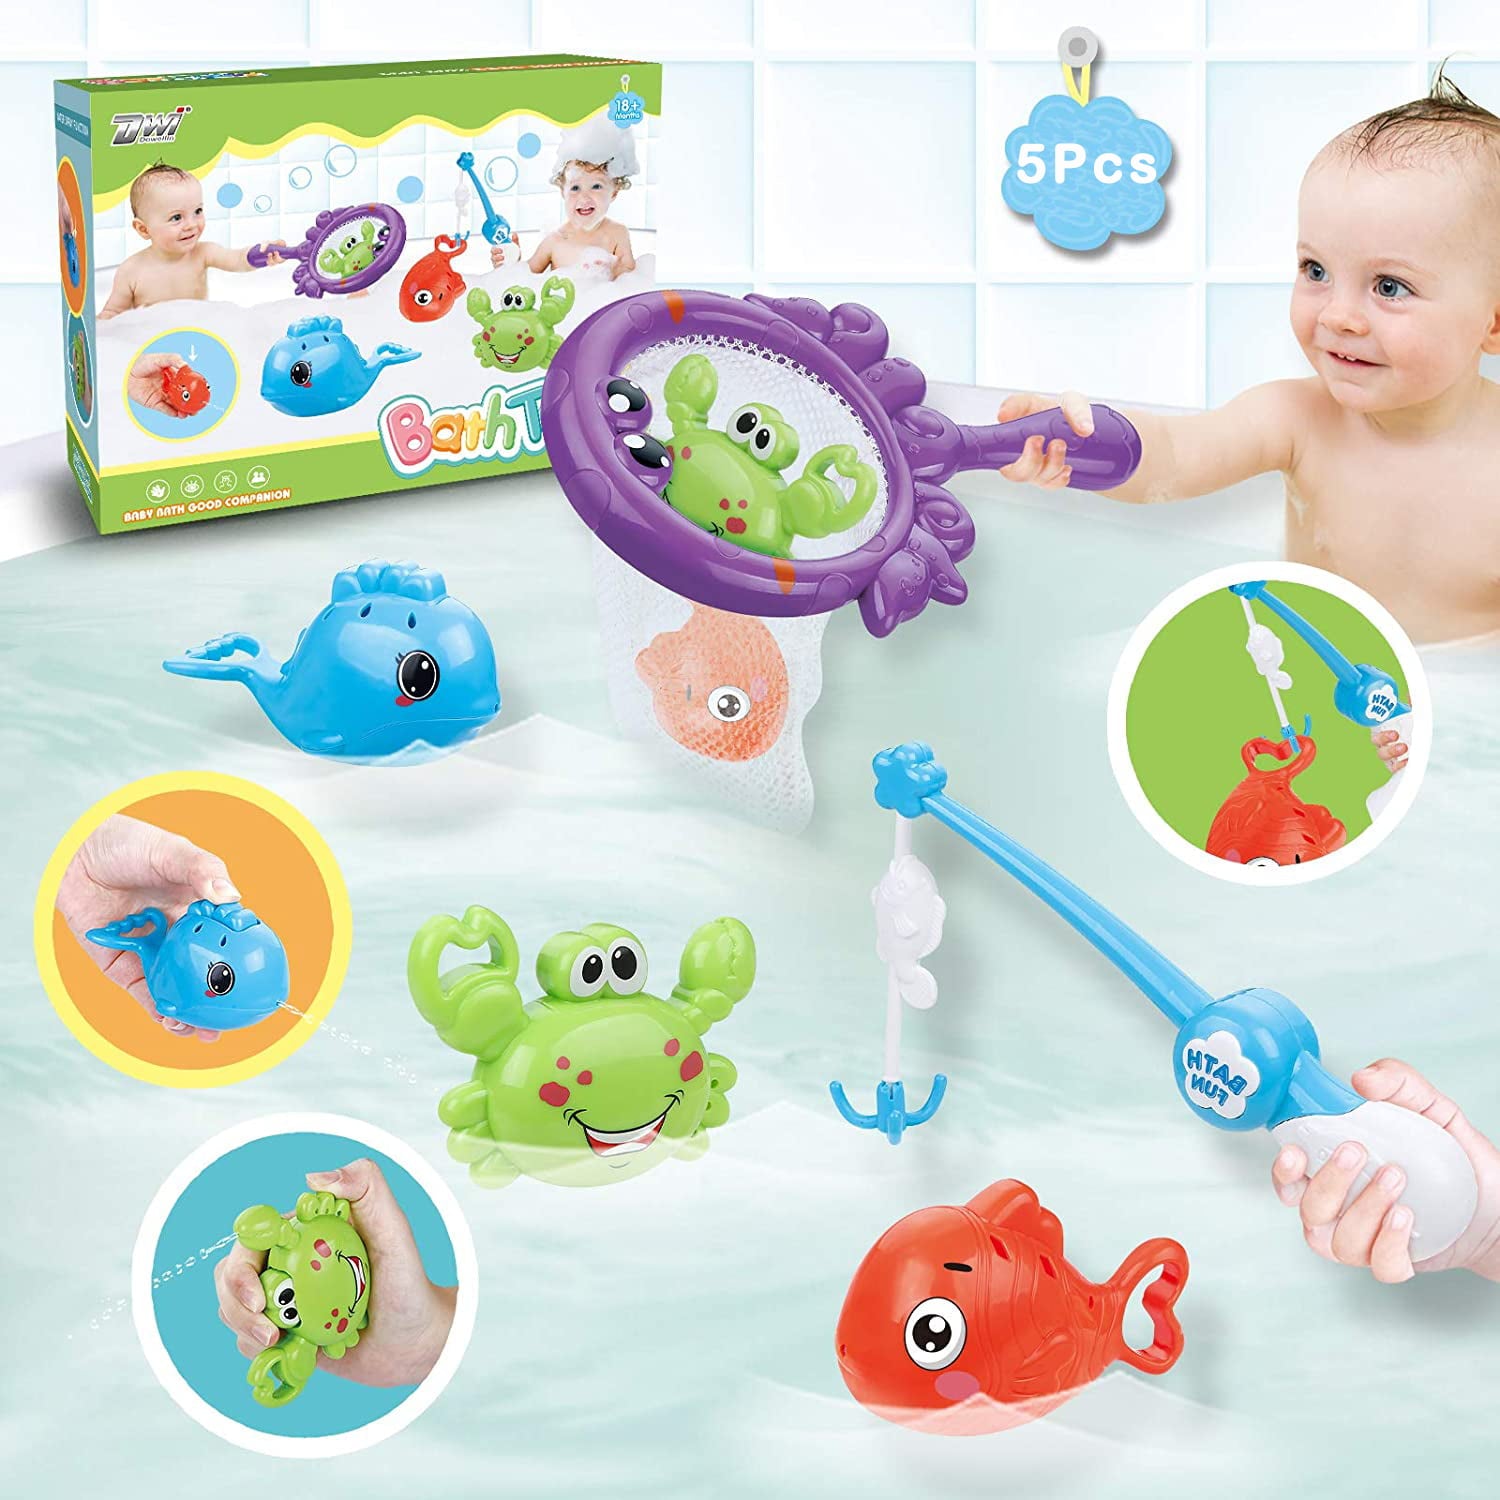 Baby Bath Fishing Toys， Bathtub Pool Toys Set with Fishing Pole and Net， Bath Toys for 1 Year Old Toddler Boys Girls